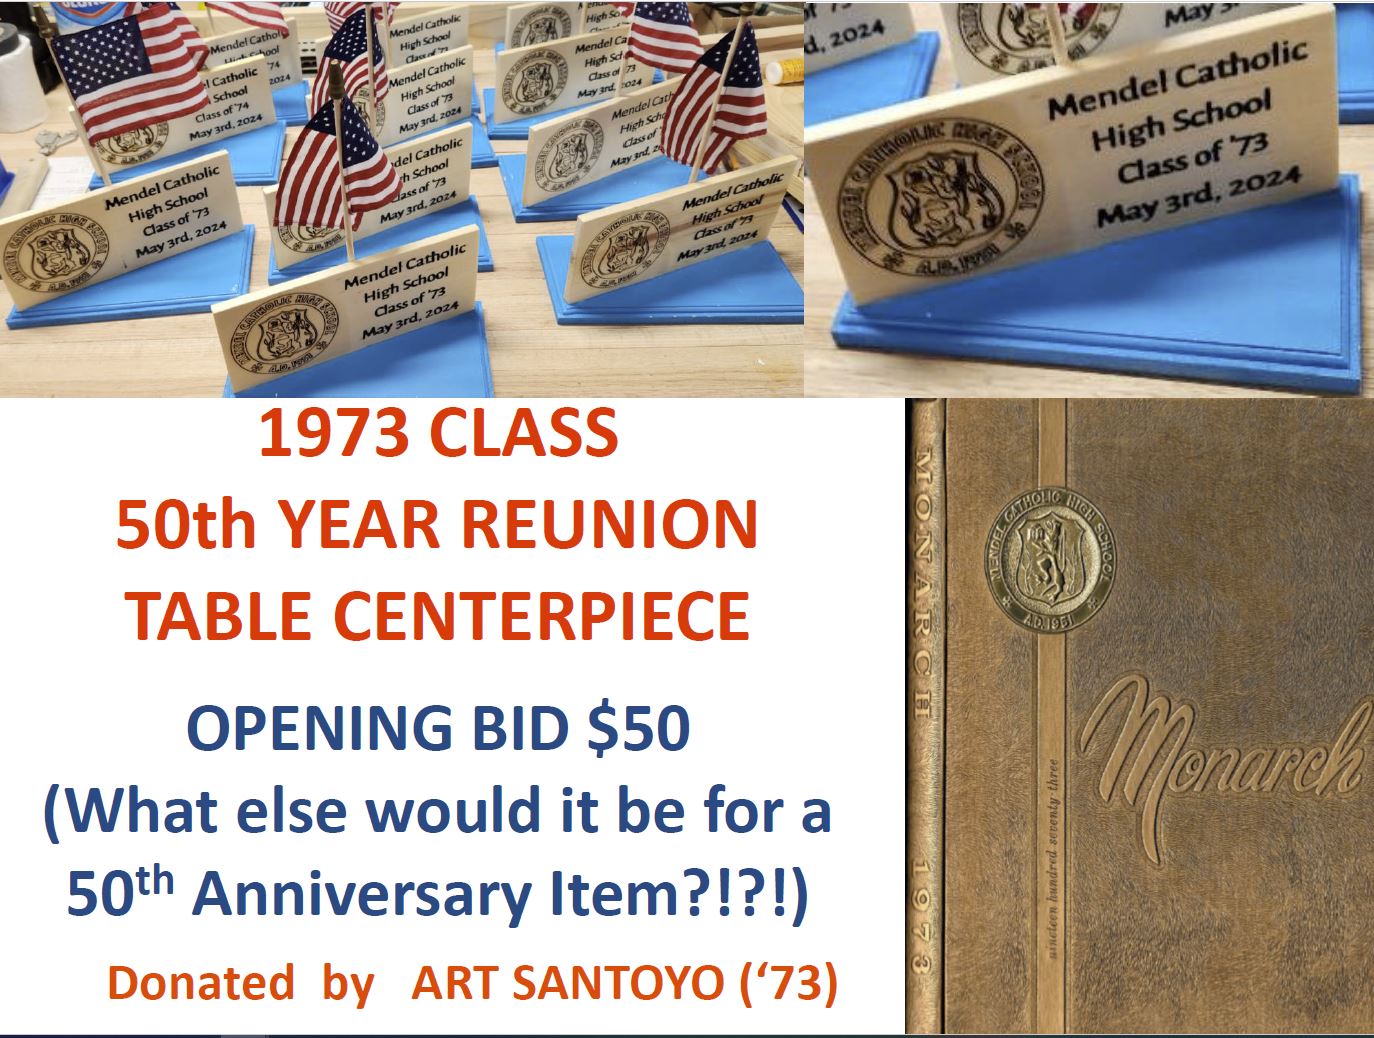 Featured image for “1973 CLASS 50th YEAR REUNION TABLE CENTERPIECE”